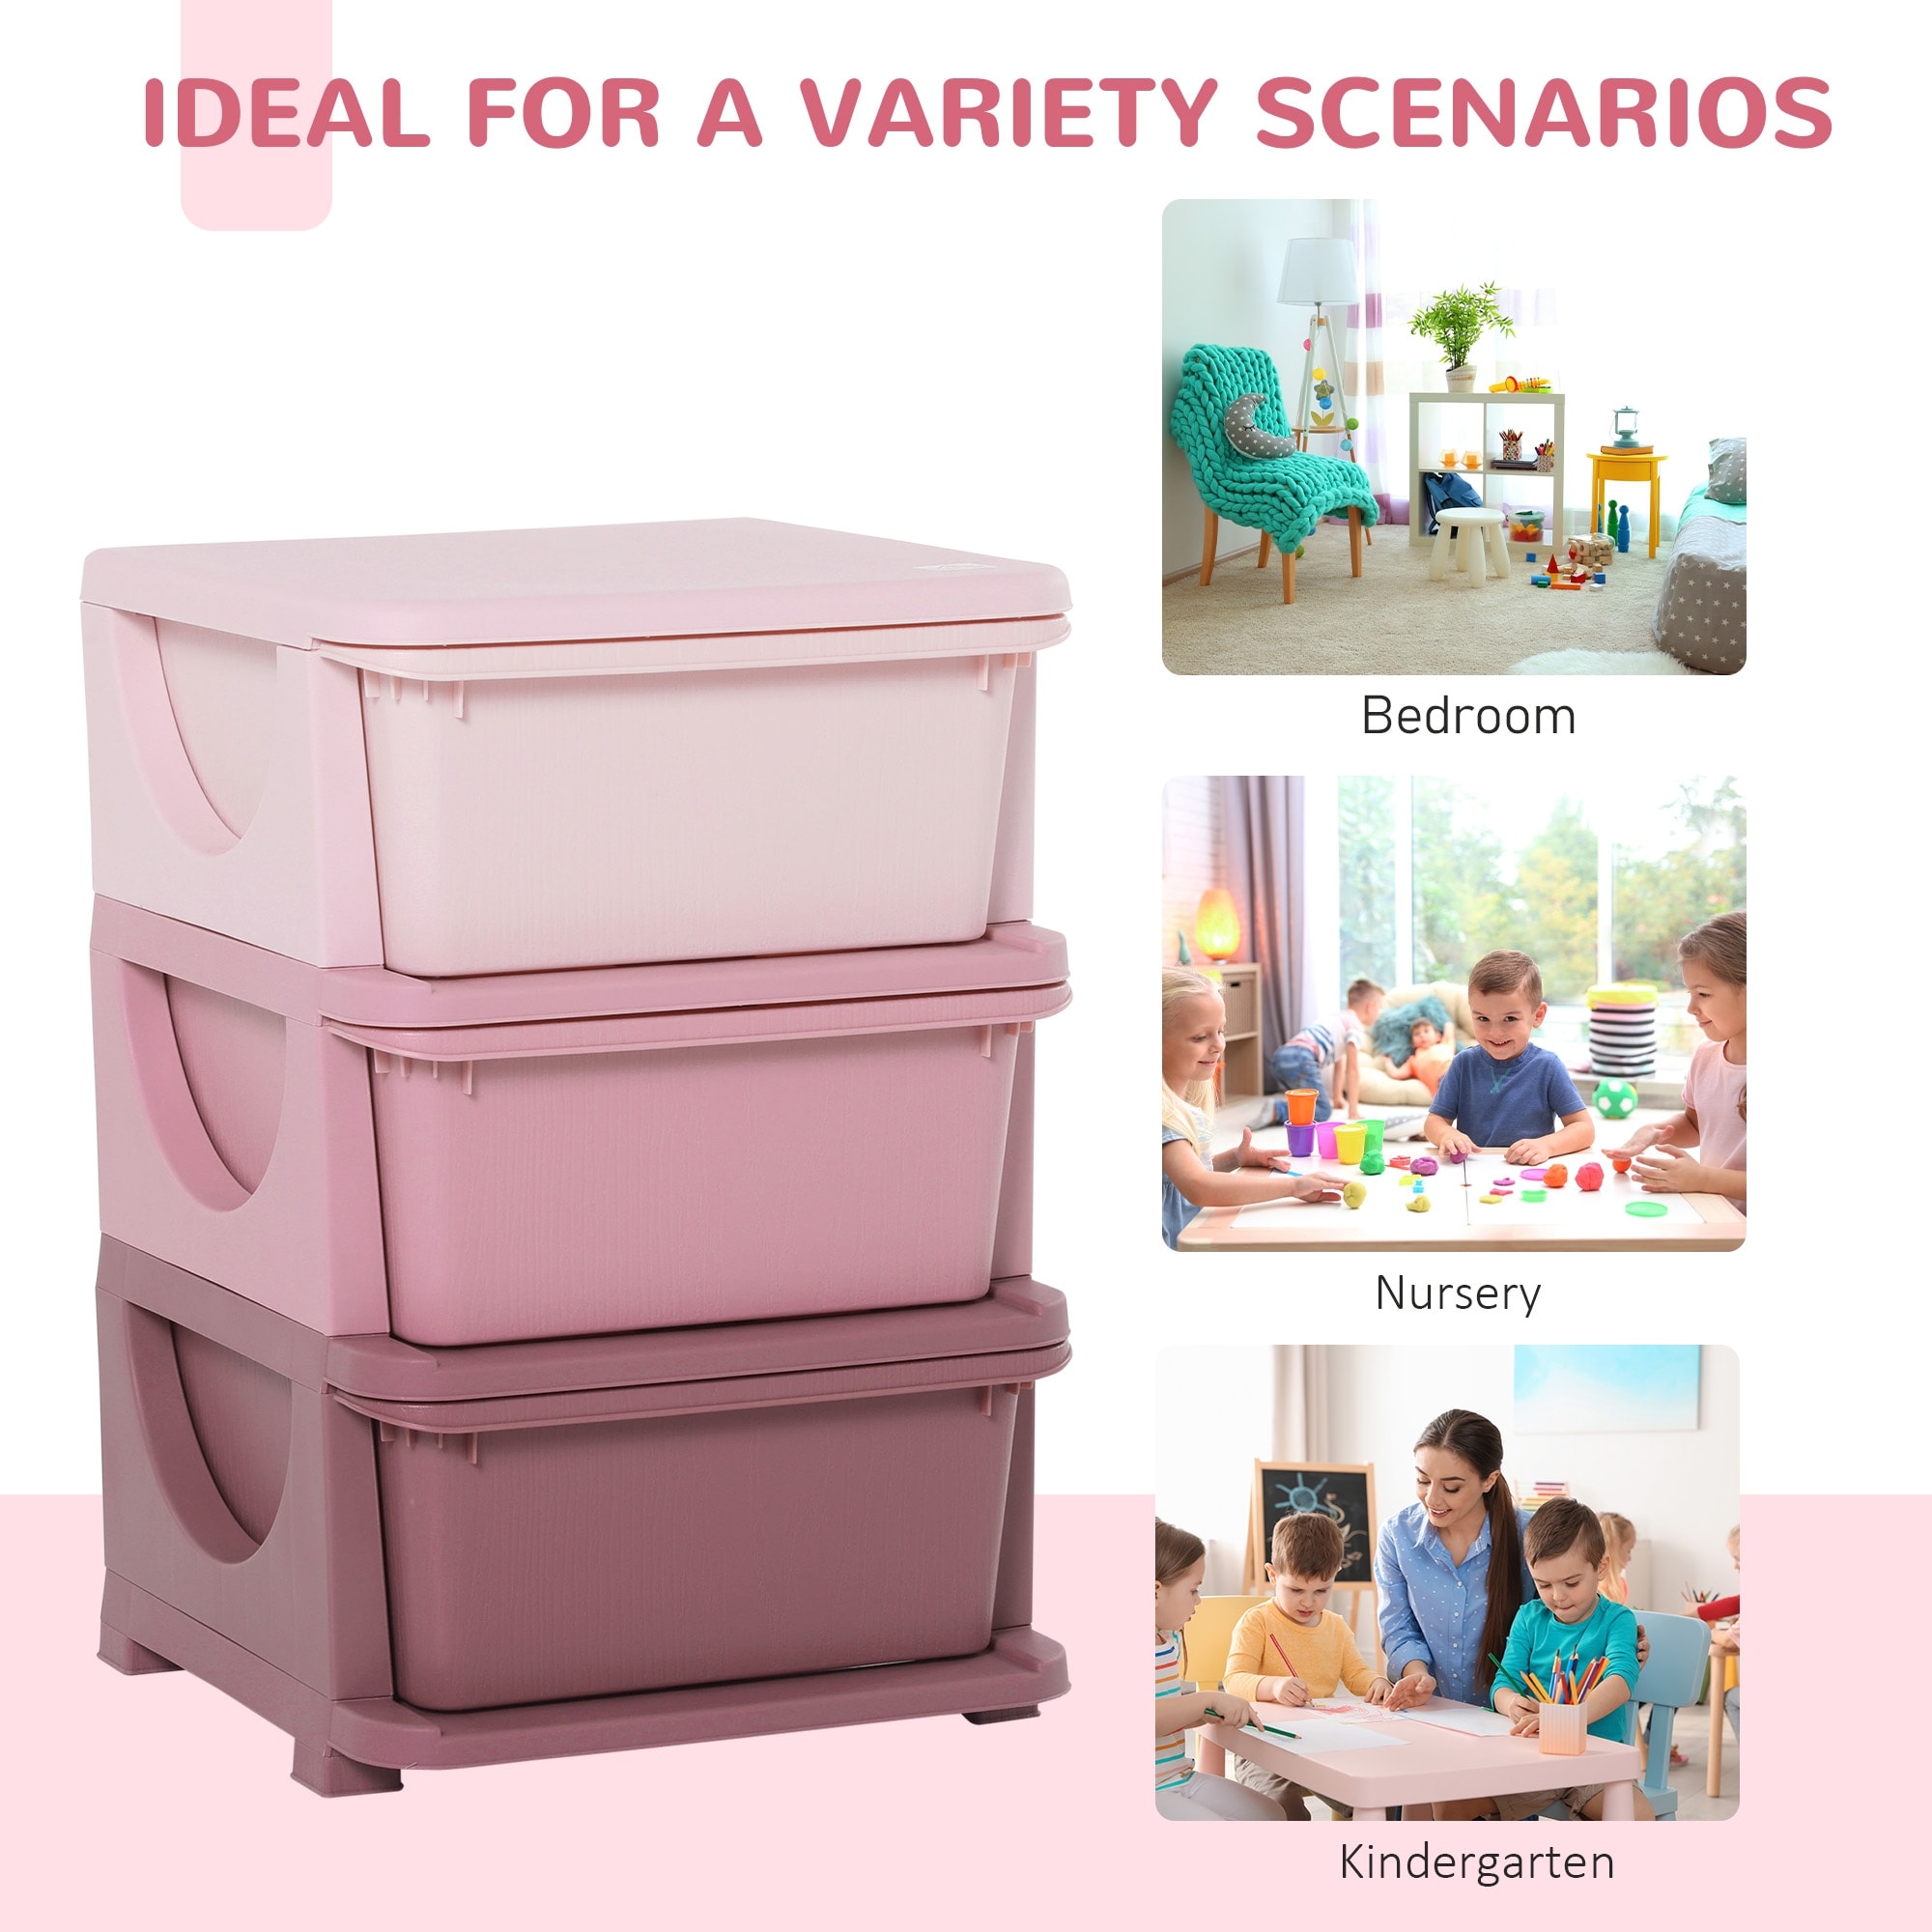 https://ak1.ostkcdn.com/images/products/is/images/direct/73b5bfd6ae3534e0d866ec7a8fde61f88c871e9e/Qaba-Kids-Storage-Unit-Dresser-Tower-with-Drawers-3-Tier-Chest-Toy-Organizer-for-Bedroom-Kindergarten-for-Boys-Girls-Toddlers.jpg